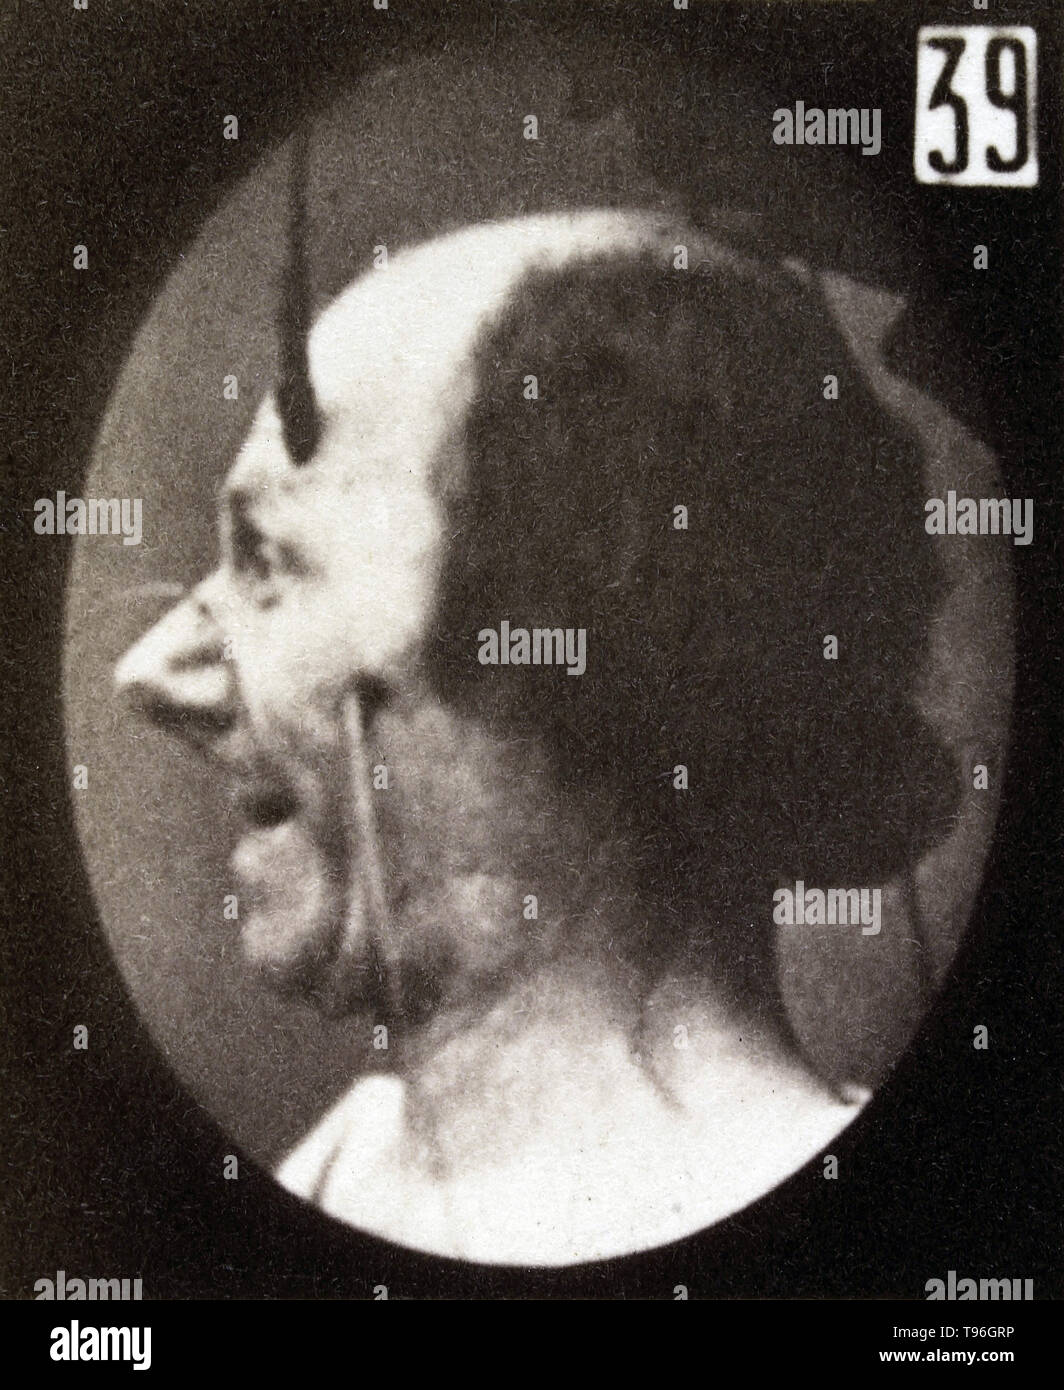 The facial expression of desire on the human face being induced by electrical currents. Guillaume-Benjamin-Amand Duchenne de Boulogne (September 17, 1806 - September 15, 1875) was a French neurologist who advanced the science of electrophysiology. Influenced by the beliefs of physiognomy, Duchenne wanted to determine how the muscles in the human face produce facial expressions which he believed to be directly linked to the soul of man. Stock Photo